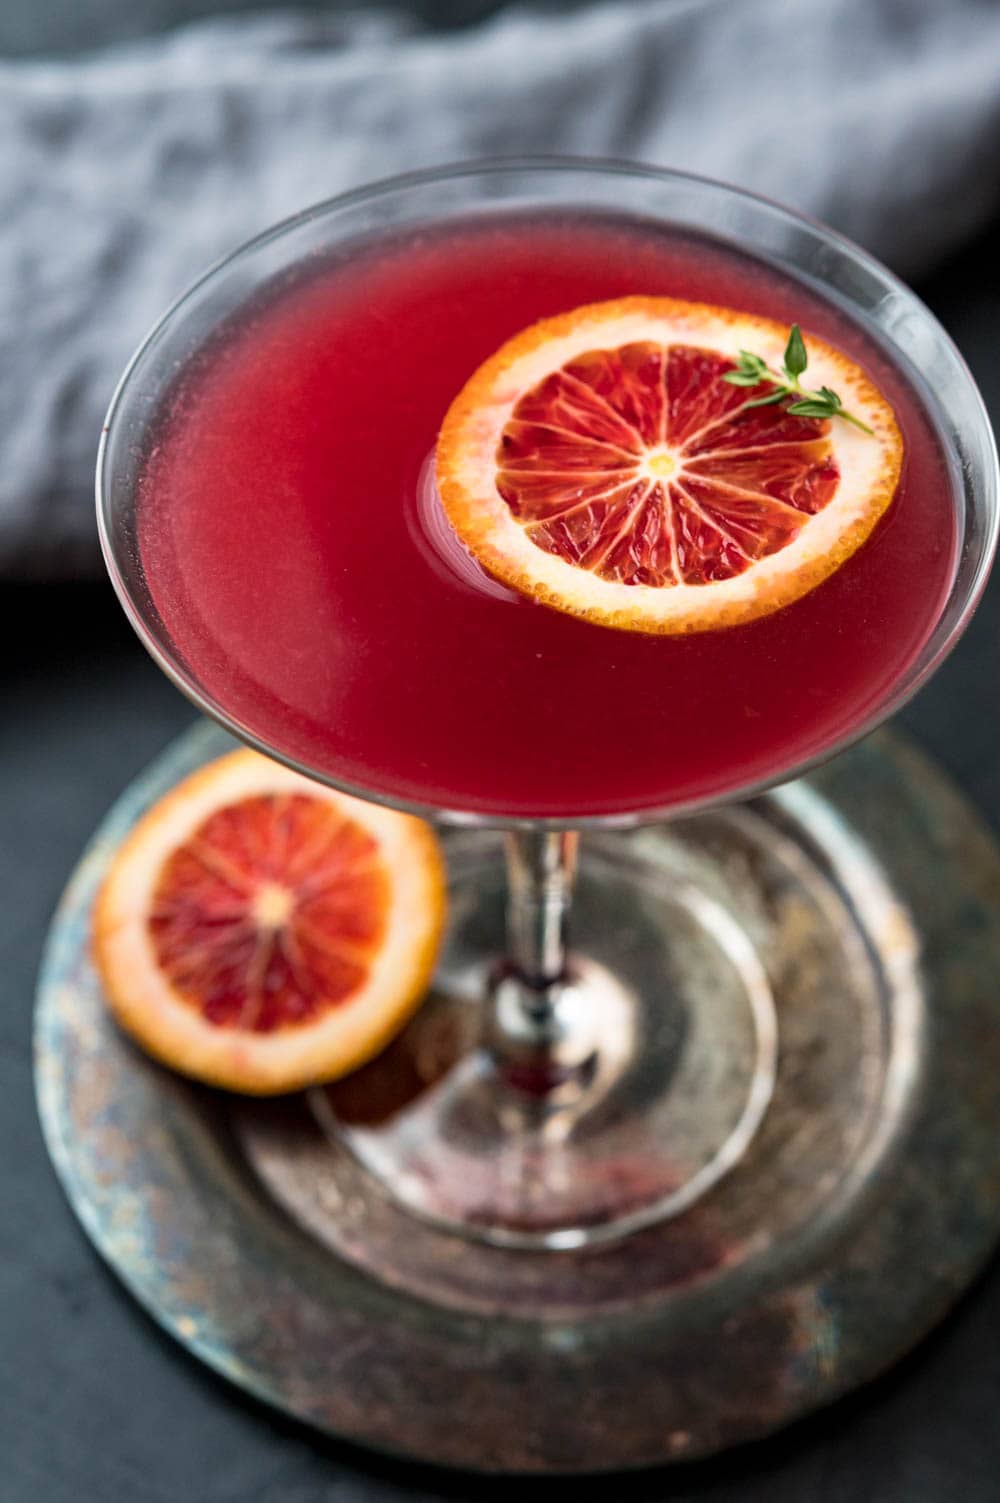 a moody image of the red cocktail with a slice of blood orange and sprig of thyme.